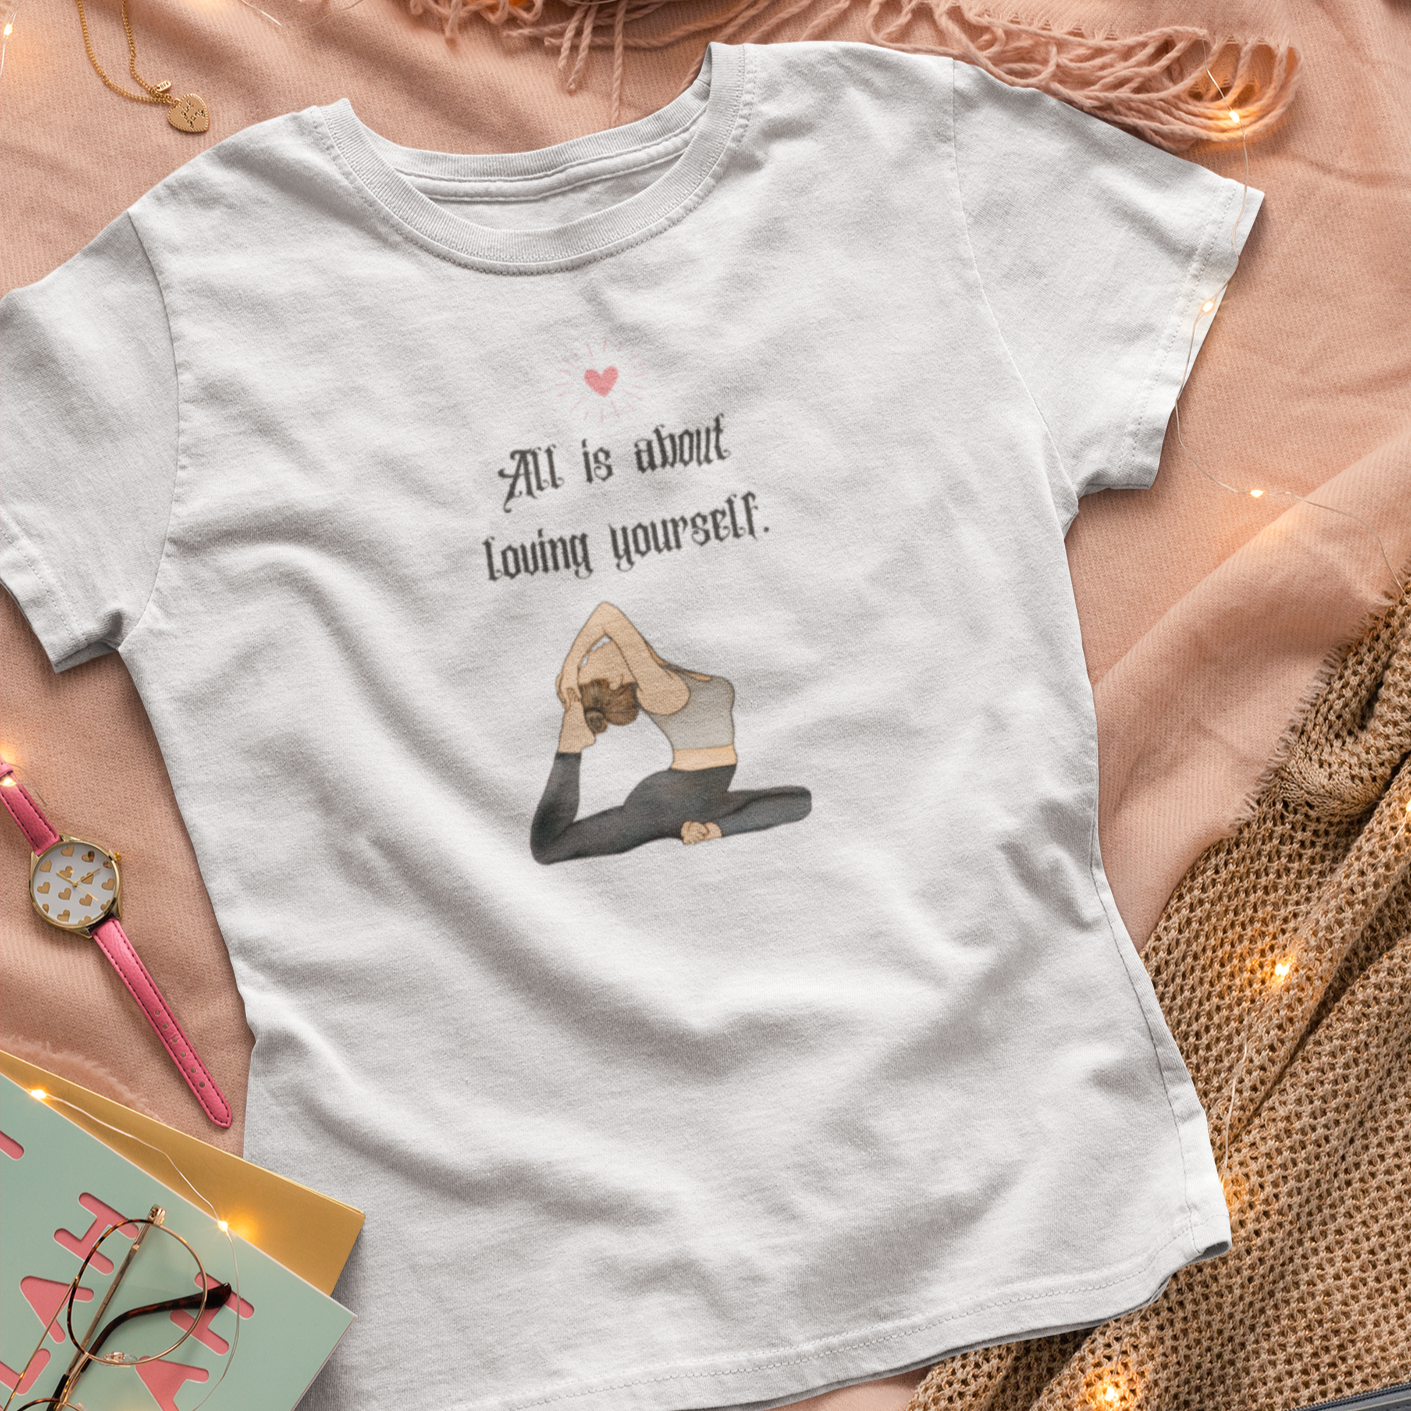 Story of Awakening Lifestyle Community Spirituality Relationships Love Light Meditation Oneness Earth Balance Healing Shop Store Charity Tree Nature Read Write T shirt Tops Tees Clothing Women Horoscope Organic Cotton All Is About Loving Yourself Quote